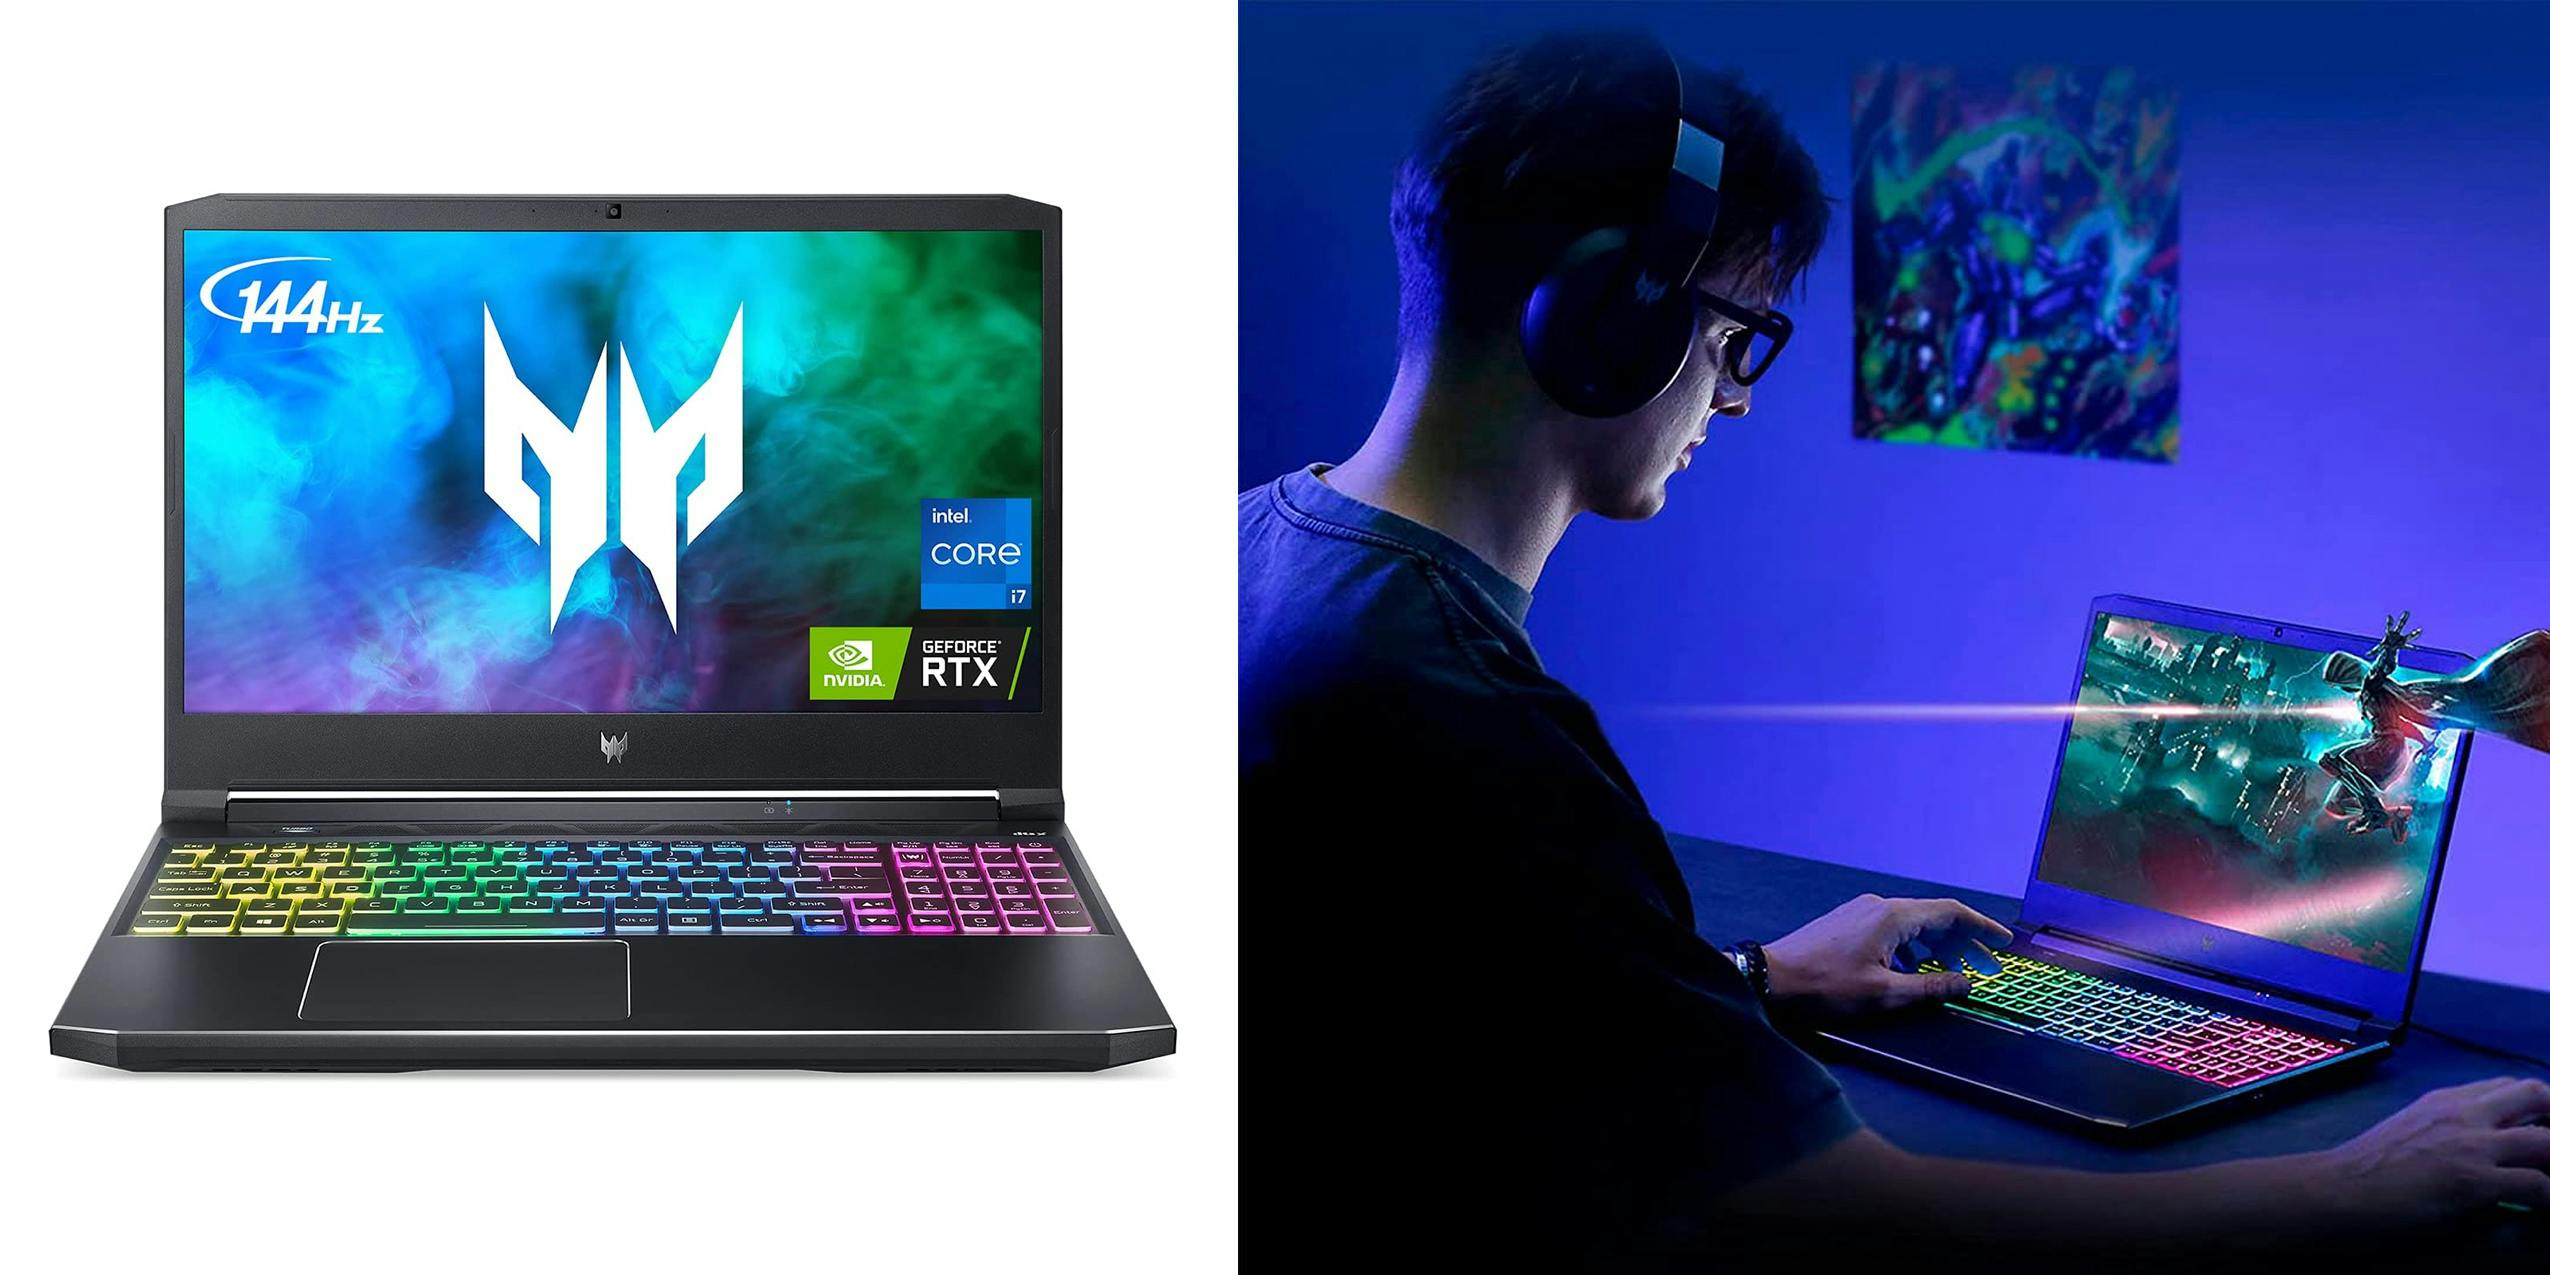 Acer Predator Helios gaming laptop being played by a gamer with headphones.